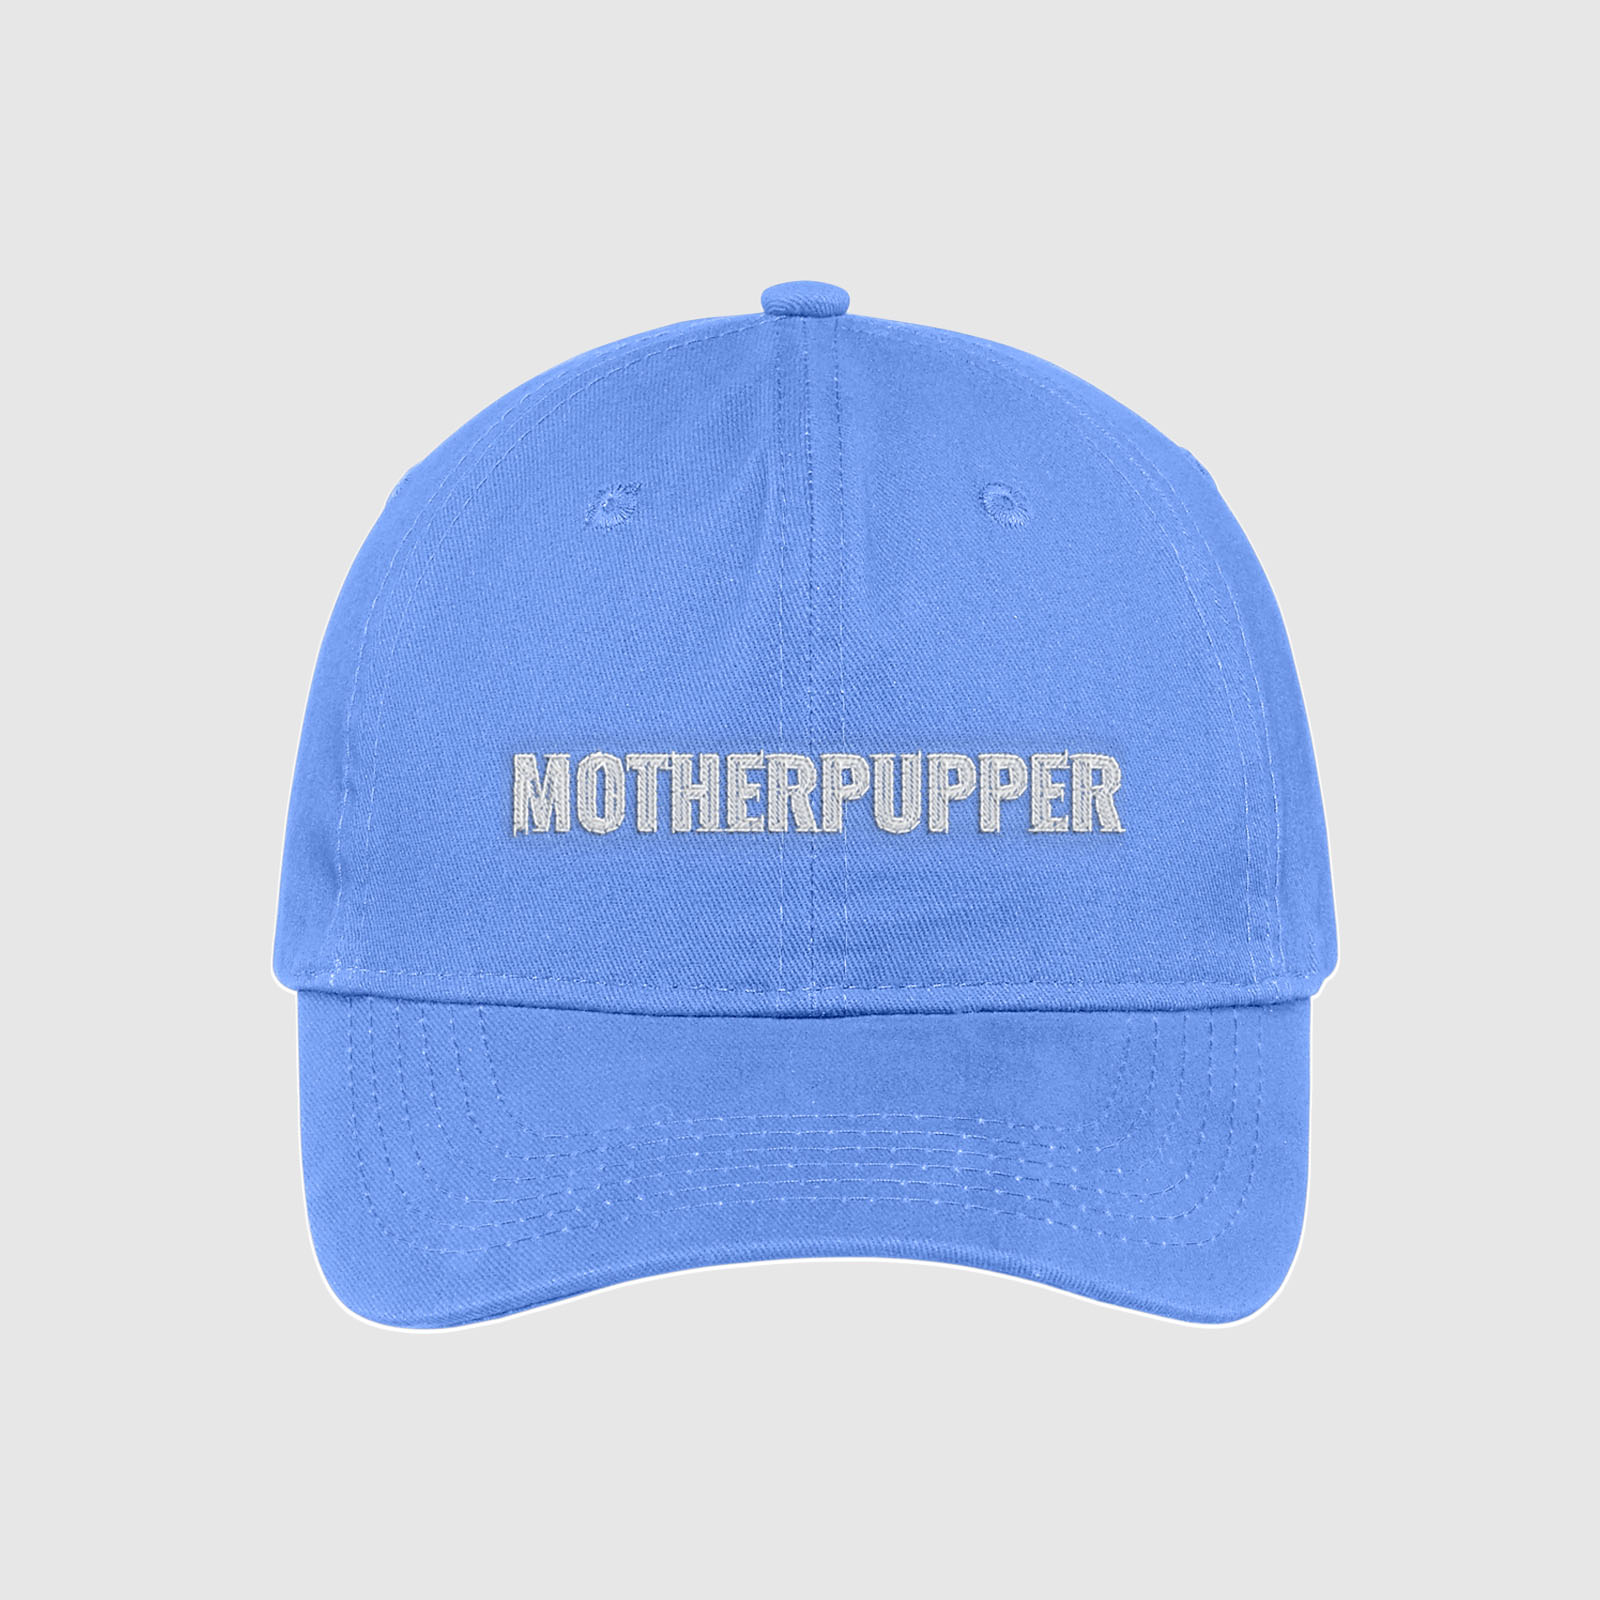 Carolina Blue Mother Pupper dad Hat for dog moms embroidered with white text.